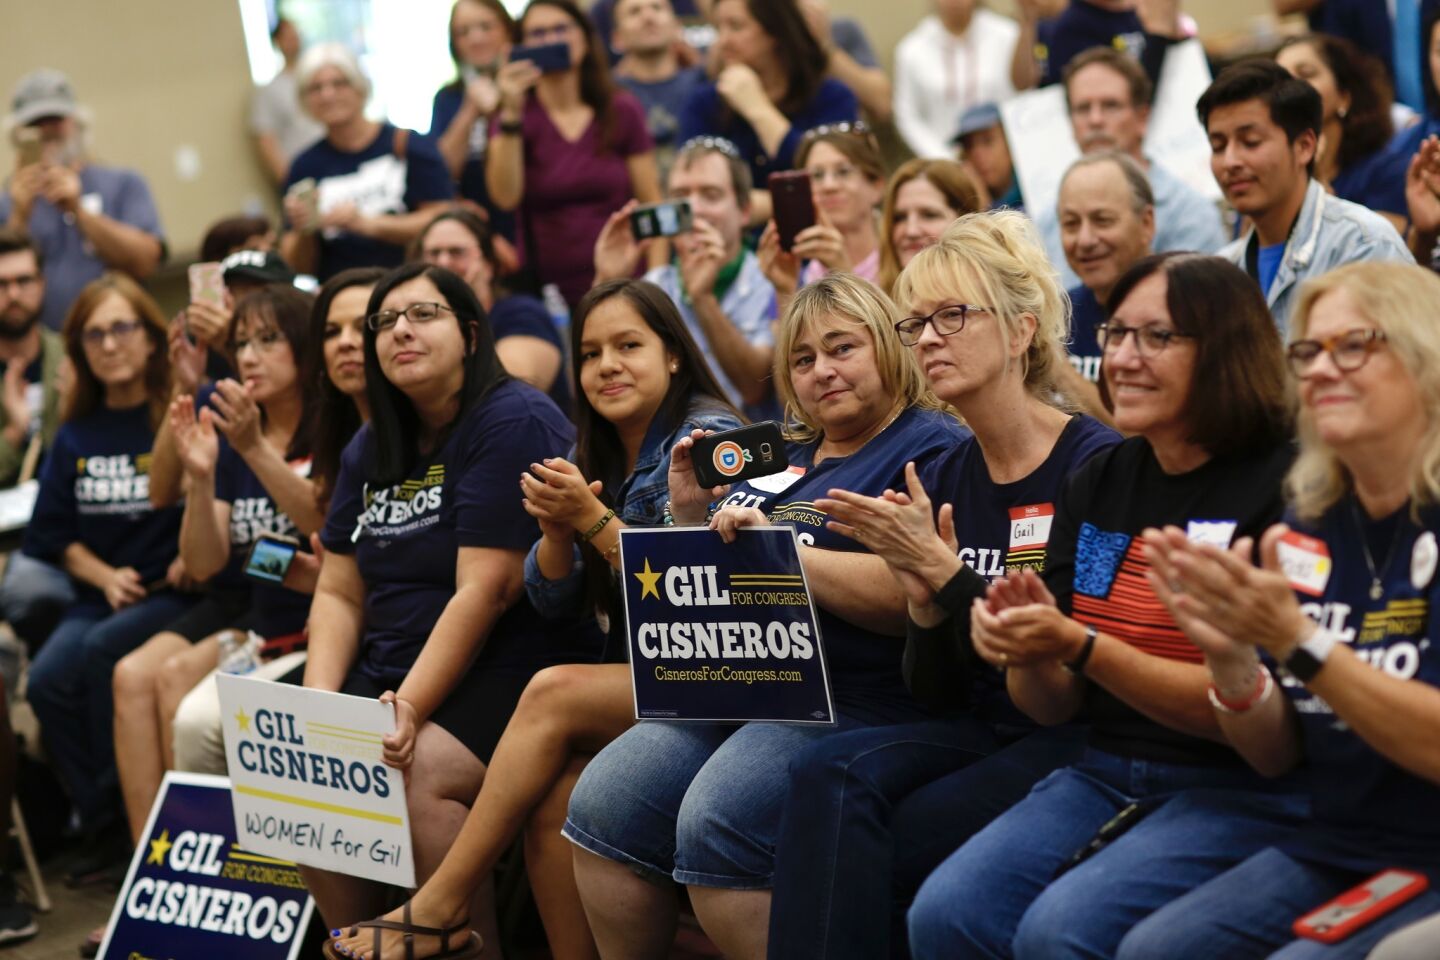 Supporters attend a rally for Democratic congressional candidate Gil Cisneros.